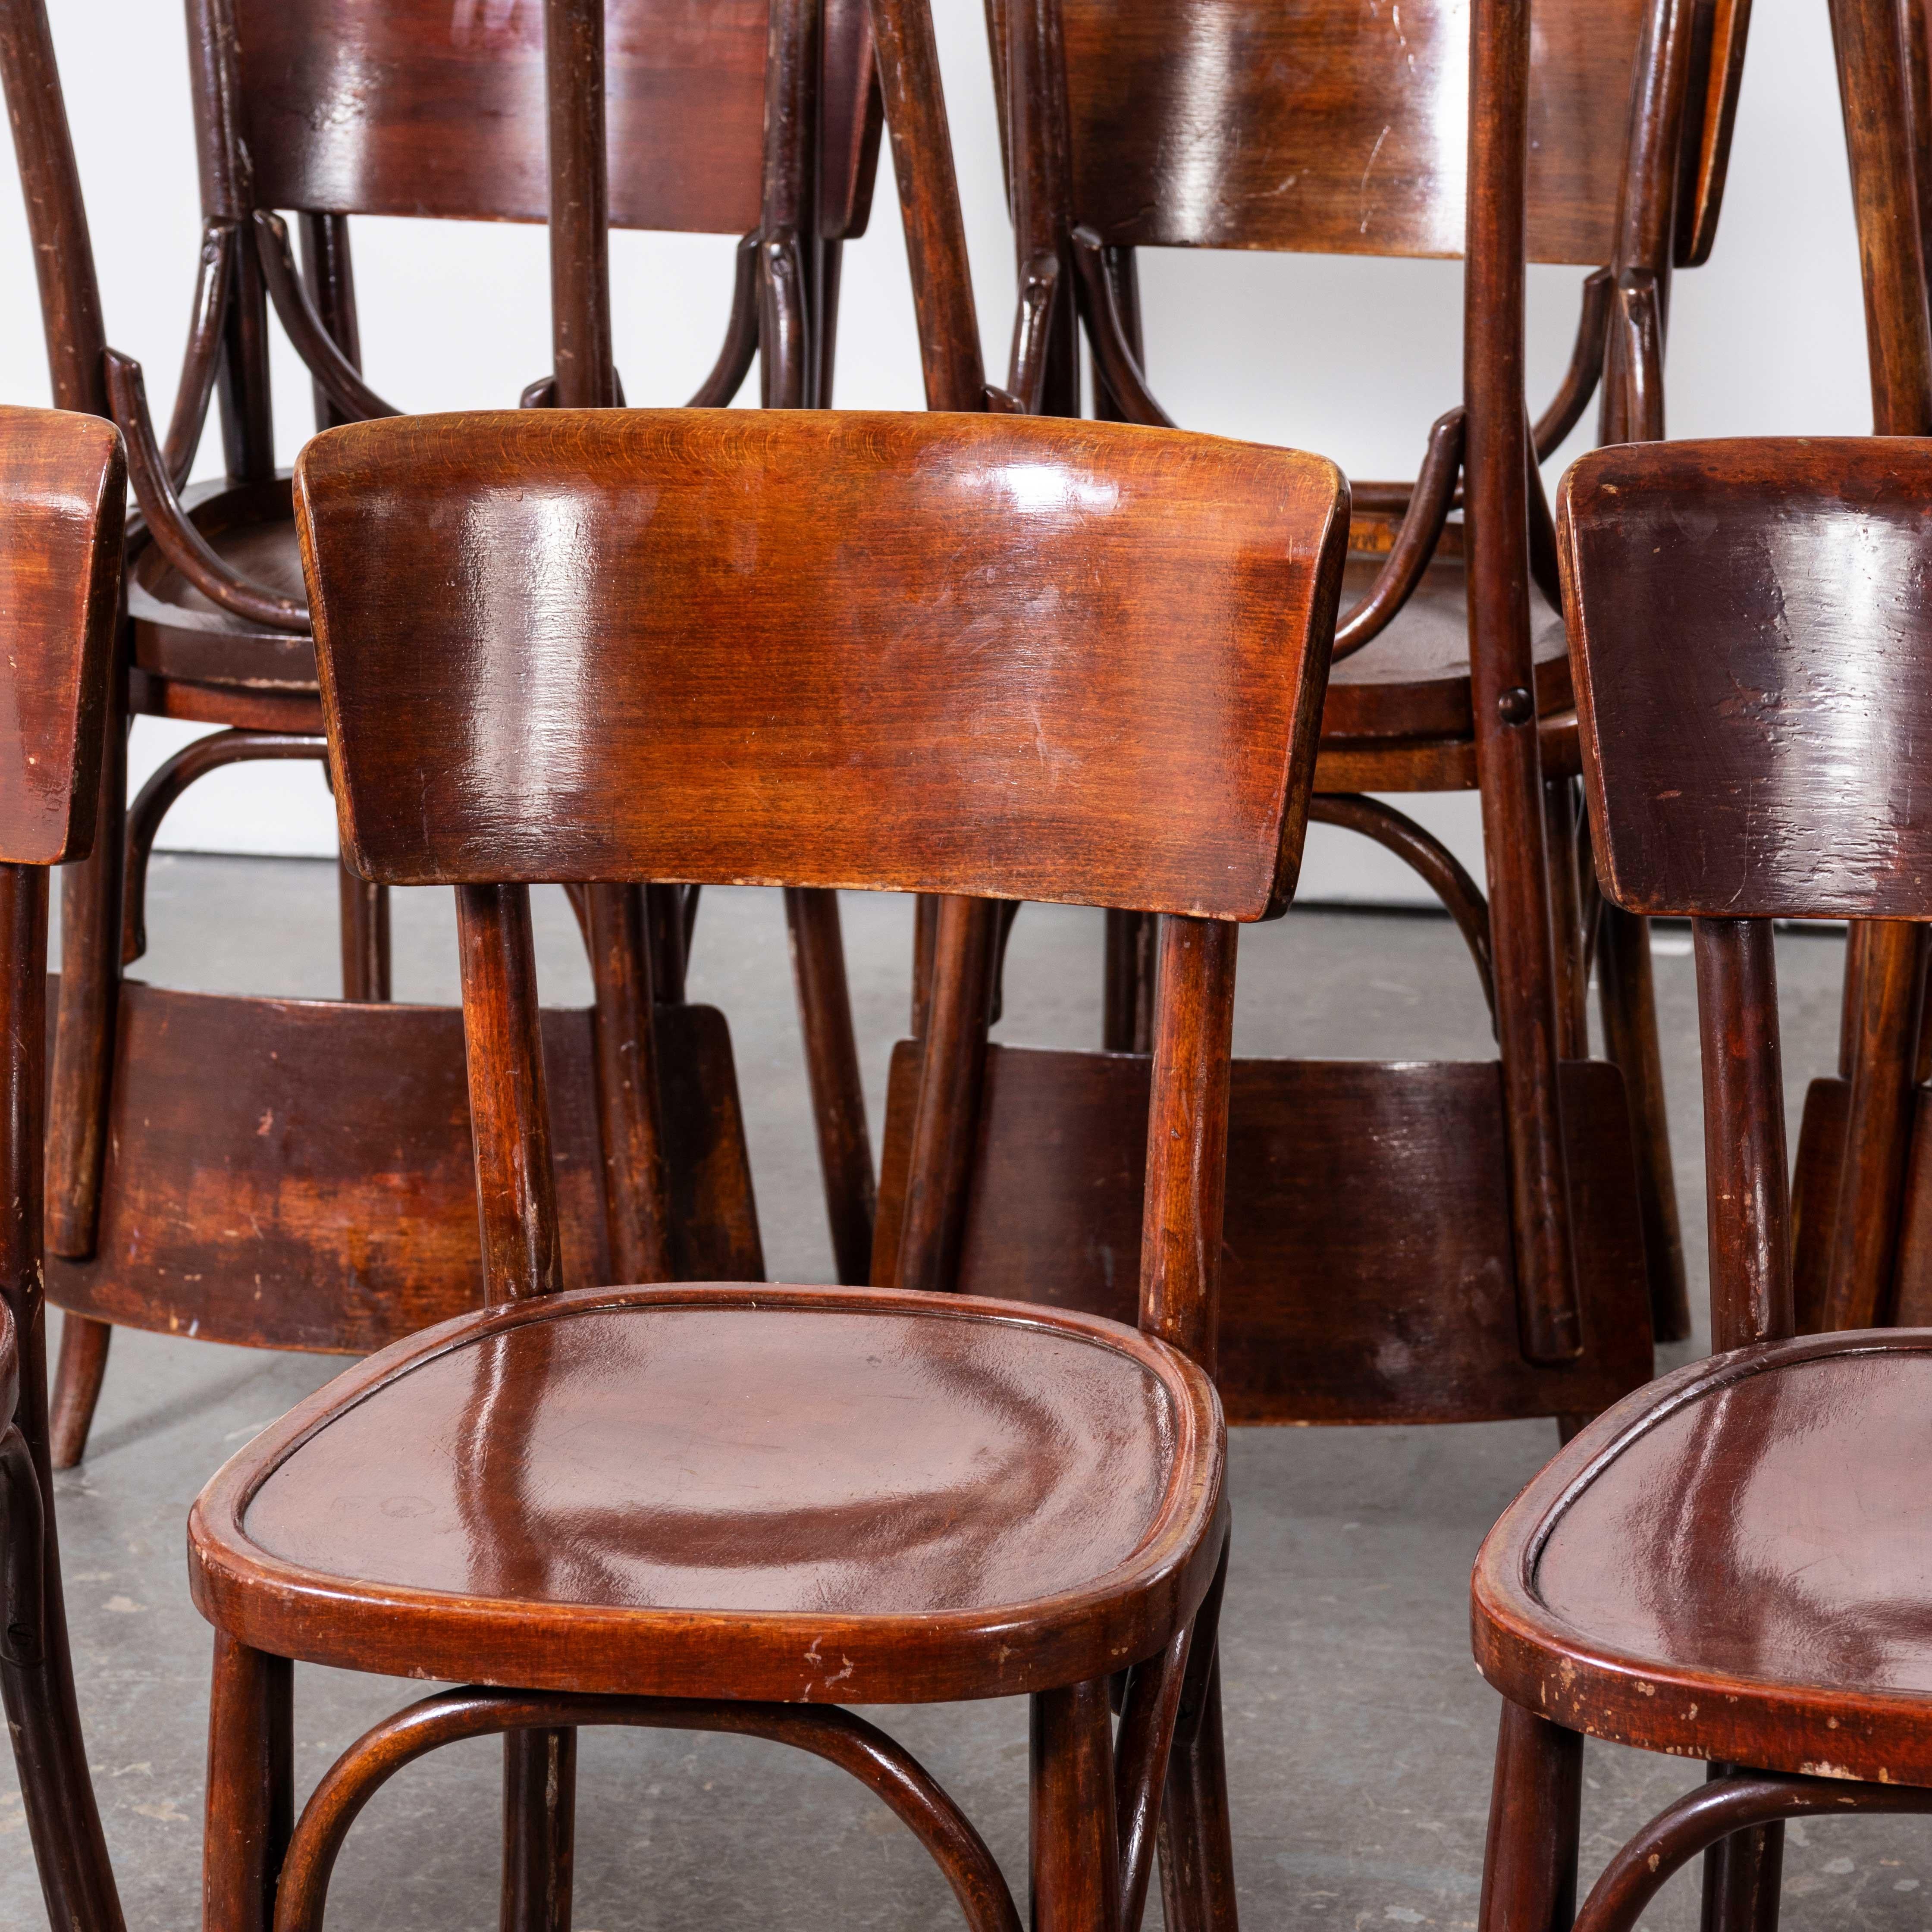 1950’s Mahieu Bentwood Dark Tan Dining Chairs – Set Of Twelve
1950’s Mahieu Bentwood Dark Tan Dining Chairs – Set Of Twelve. Classic early beech bistro chair made in France by the maker Mahieu. Not much is known of the history of Mahieu except they